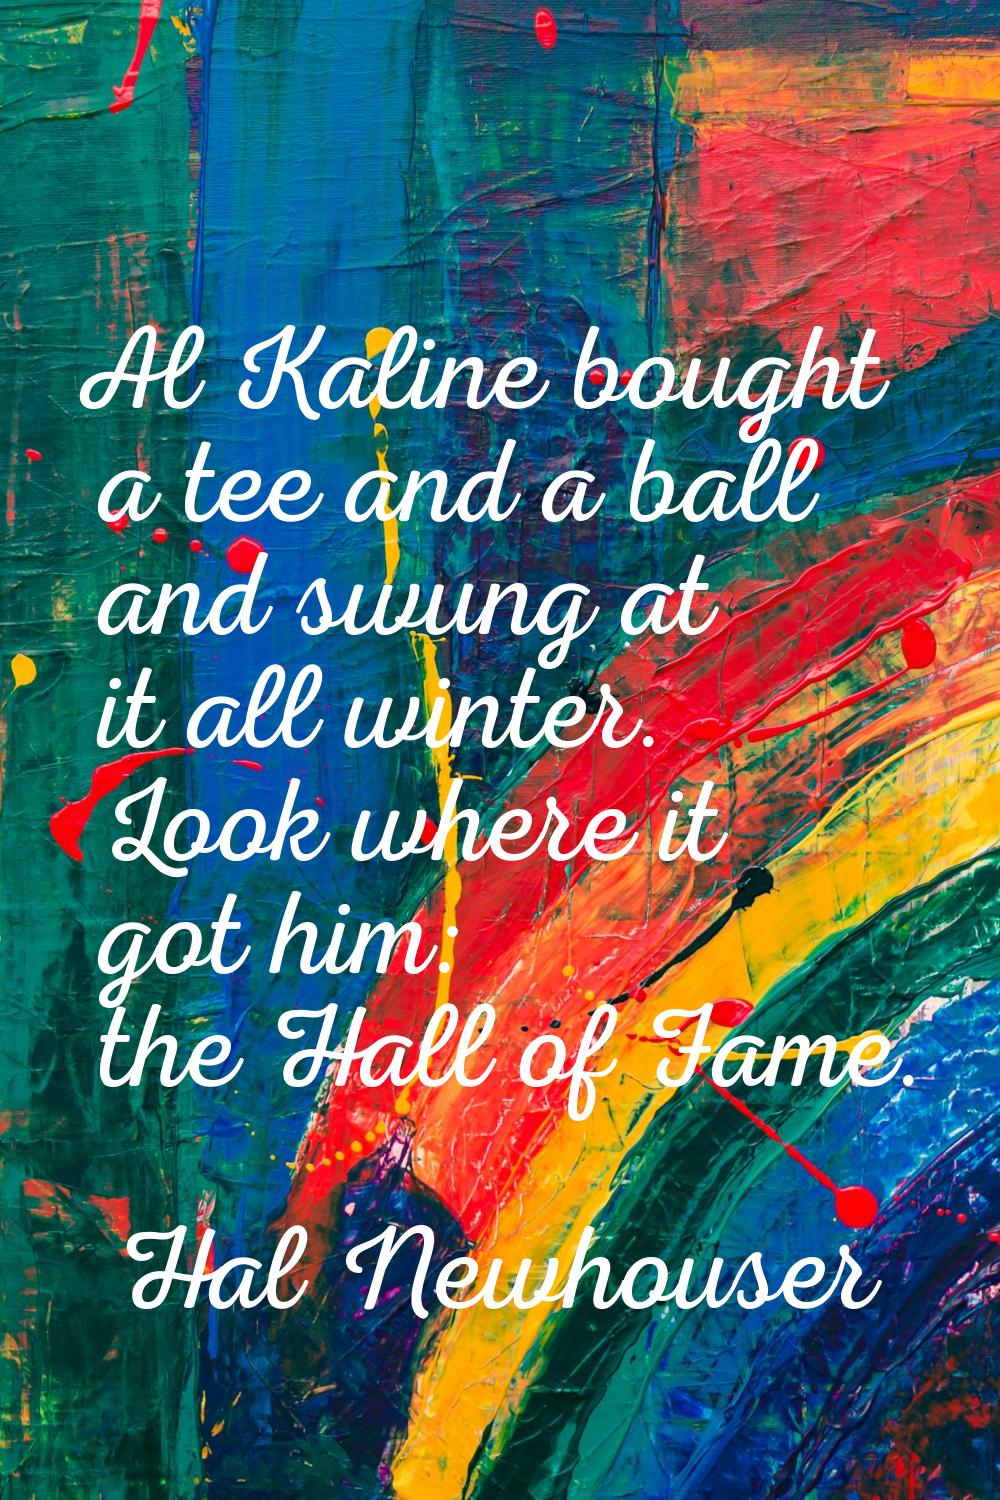 Al Kaline bought a tee and a ball and swung at it all winter. Look where it got him: the Hall of Fa